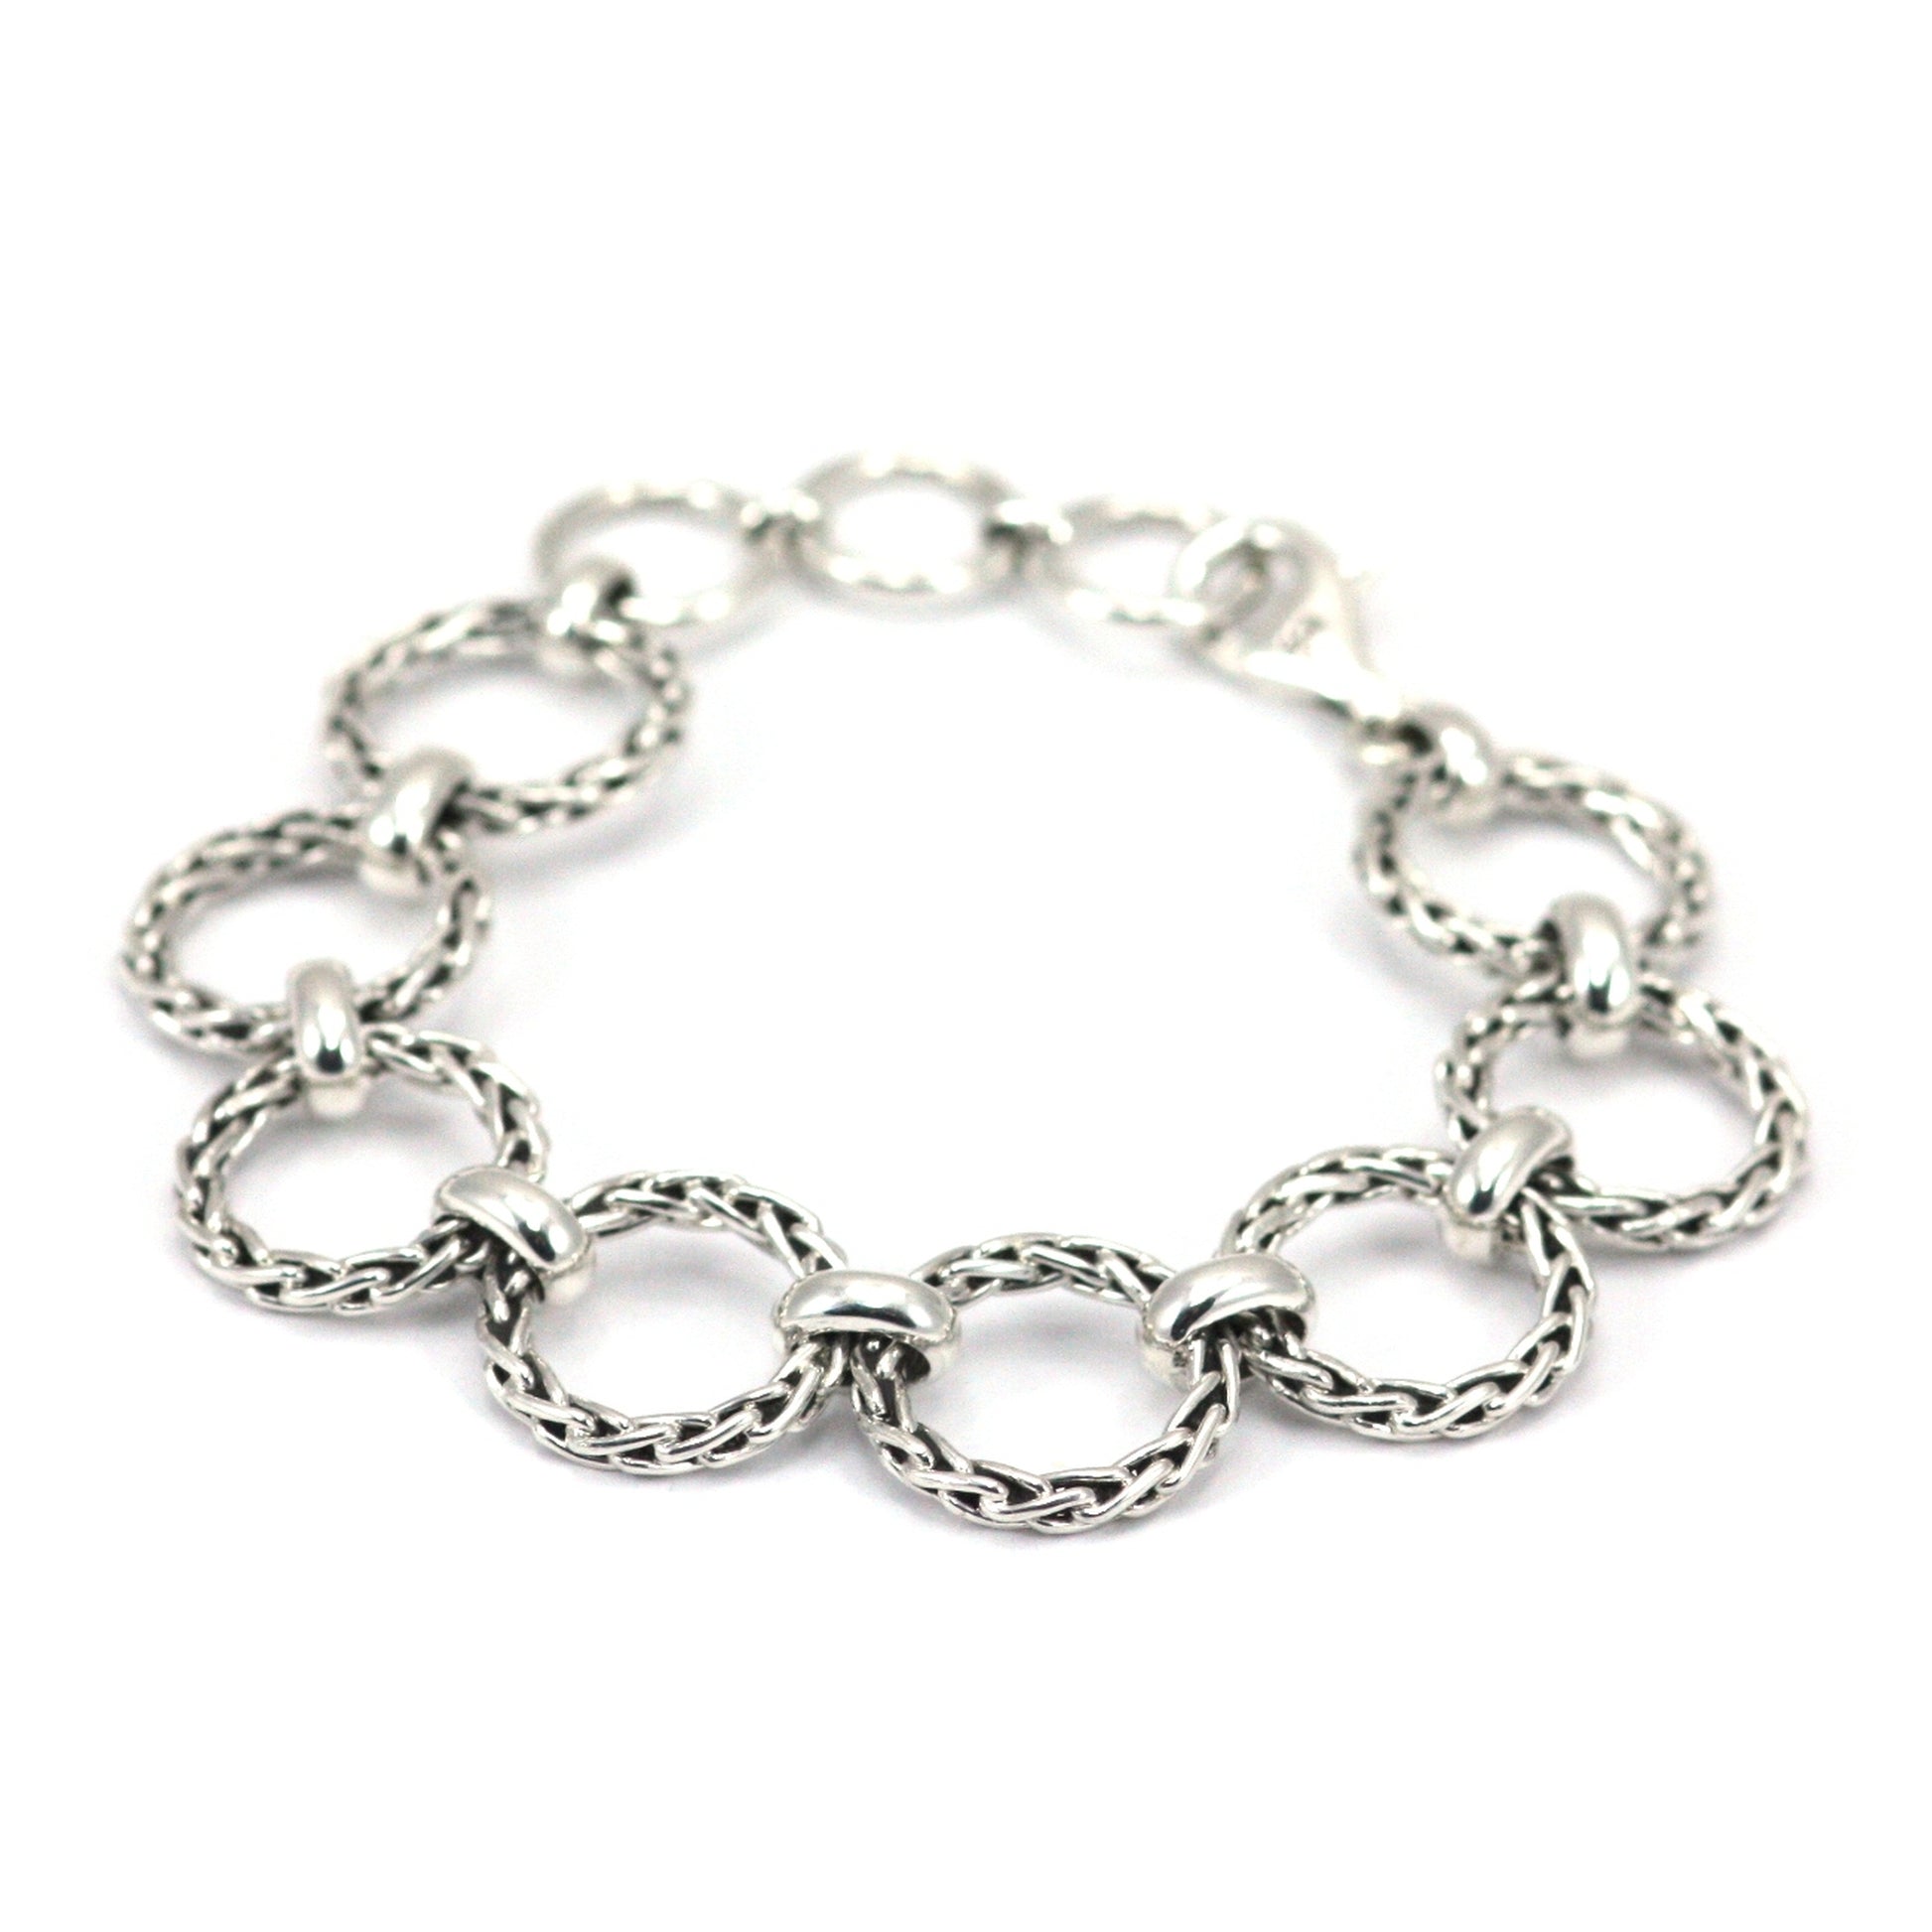 Silver bracelet made of rigid silver wheat ring links.